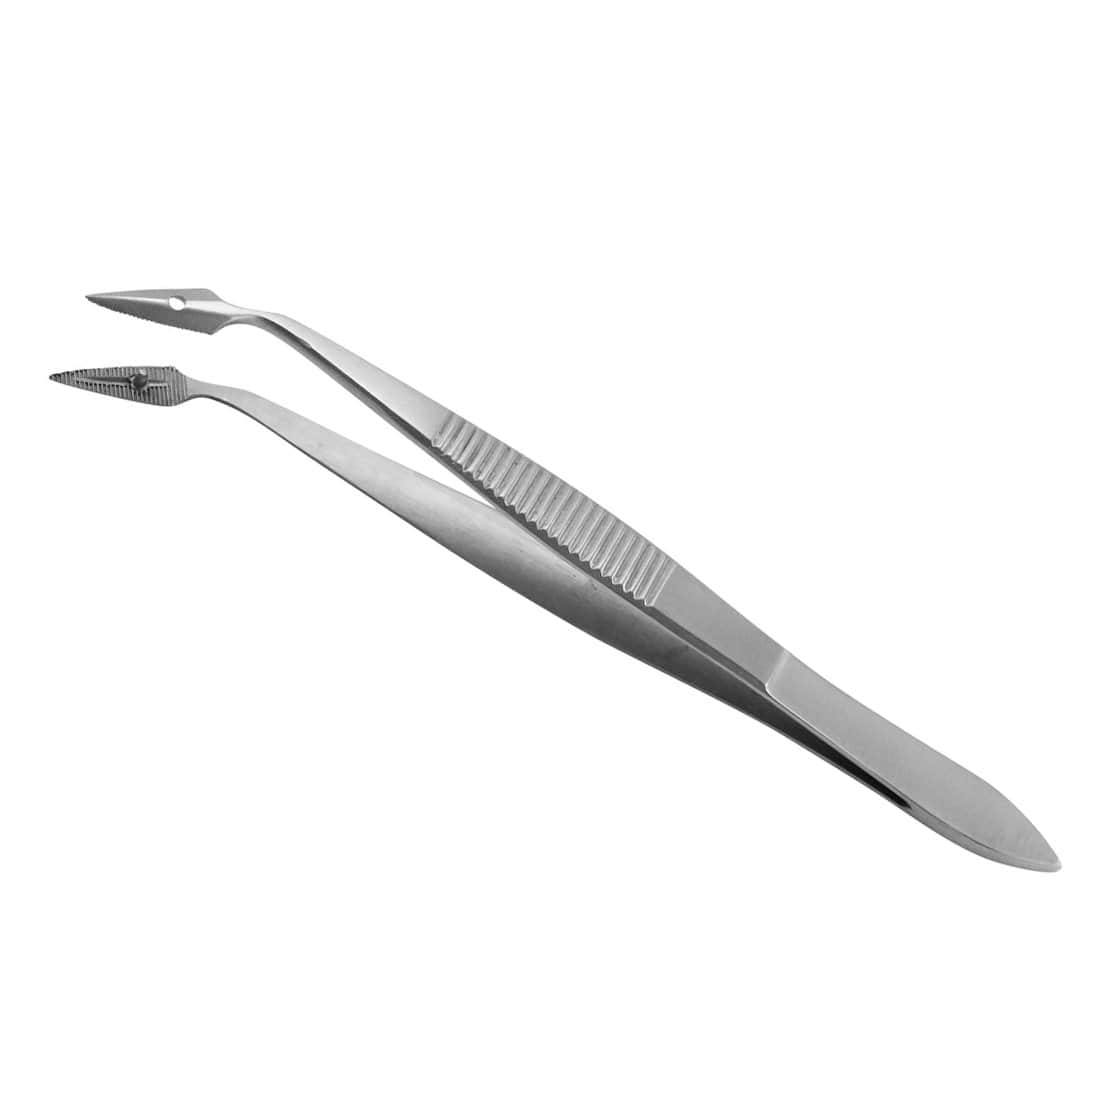 Armo Surgical Instruments Armo Hunter Forceps Splinter